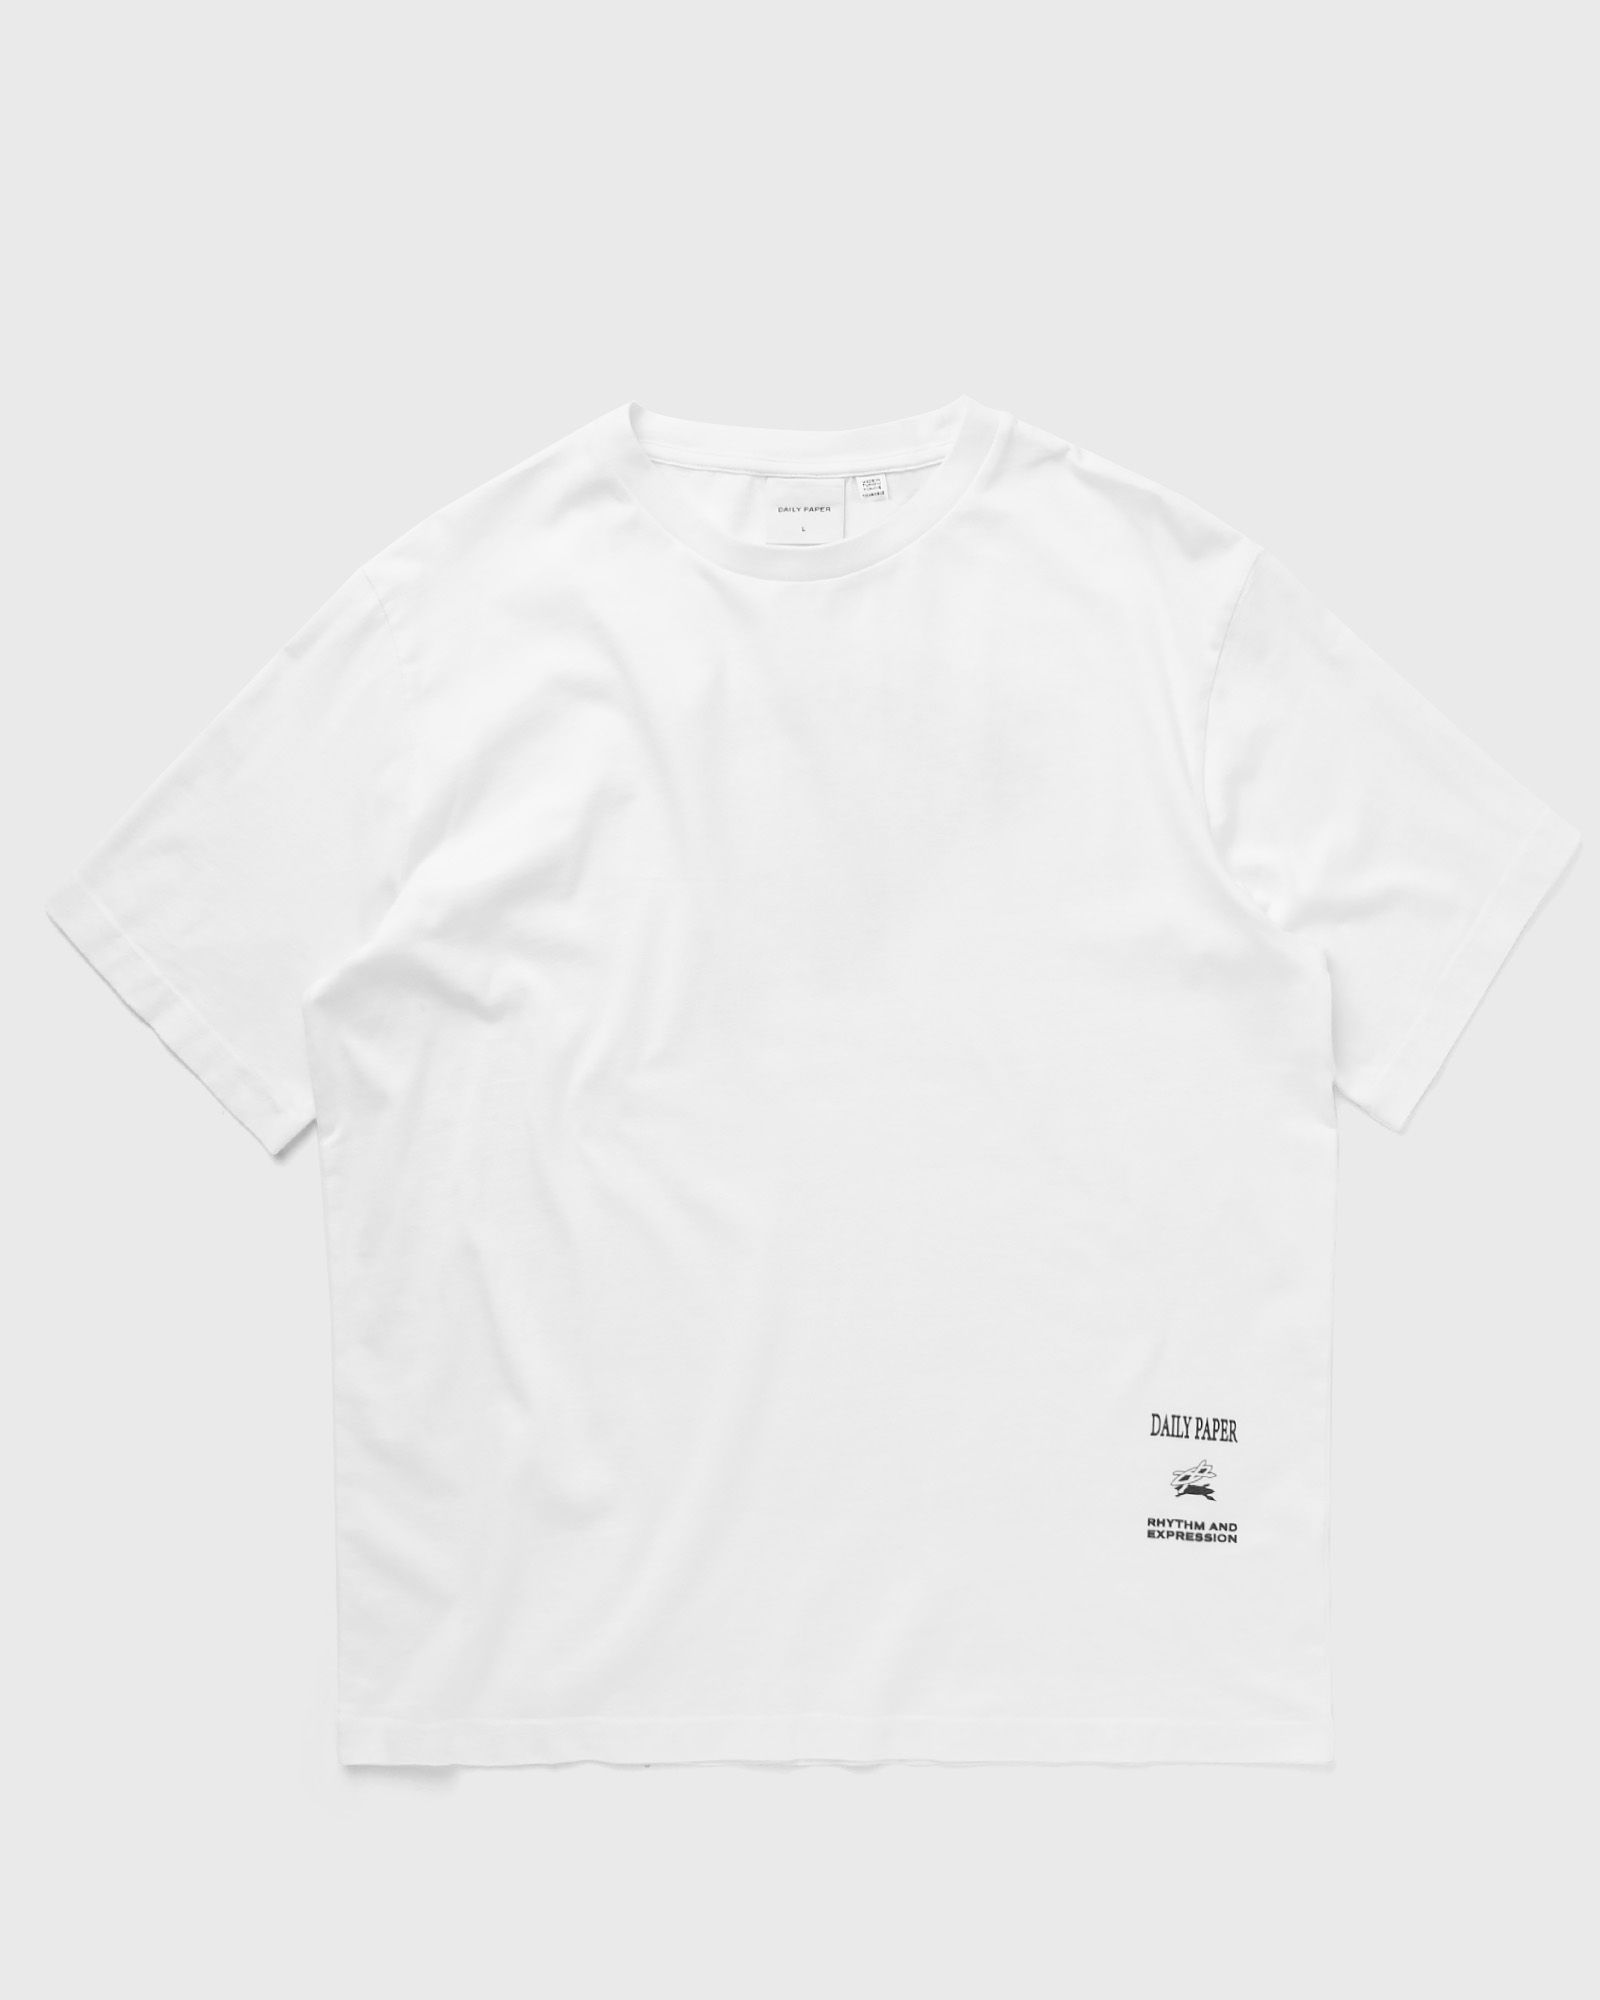 Daily Paper Metronome ss t-shirt men Shortsleeves white in Größe:M von Daily Paper